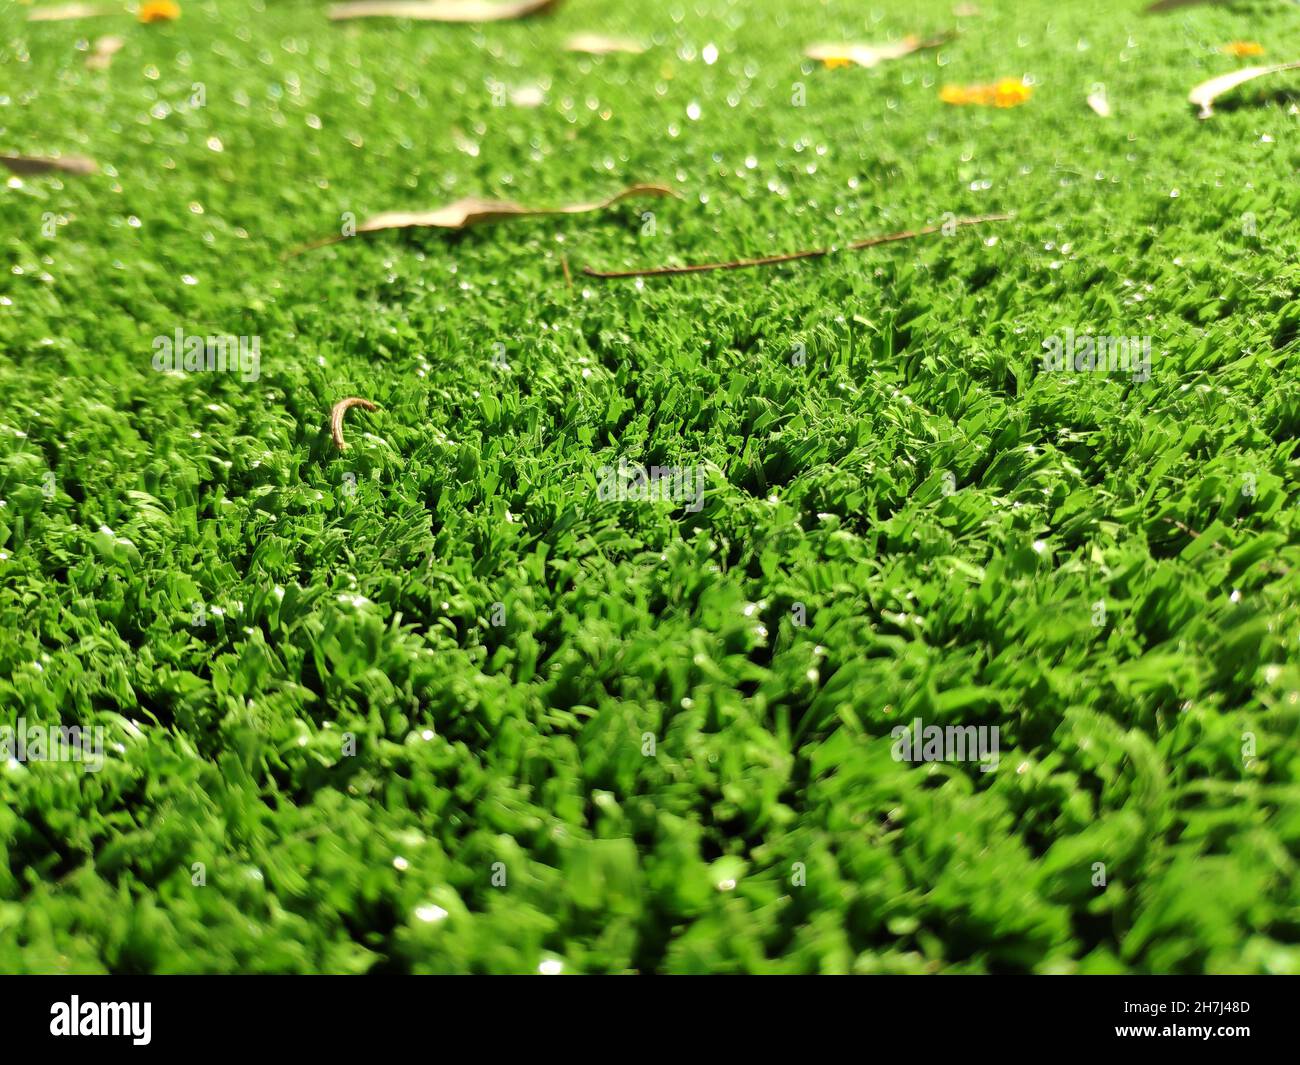 Fresh green grass background, close view macro photo with blurred edges. Natural background wallpaper Stock Photo